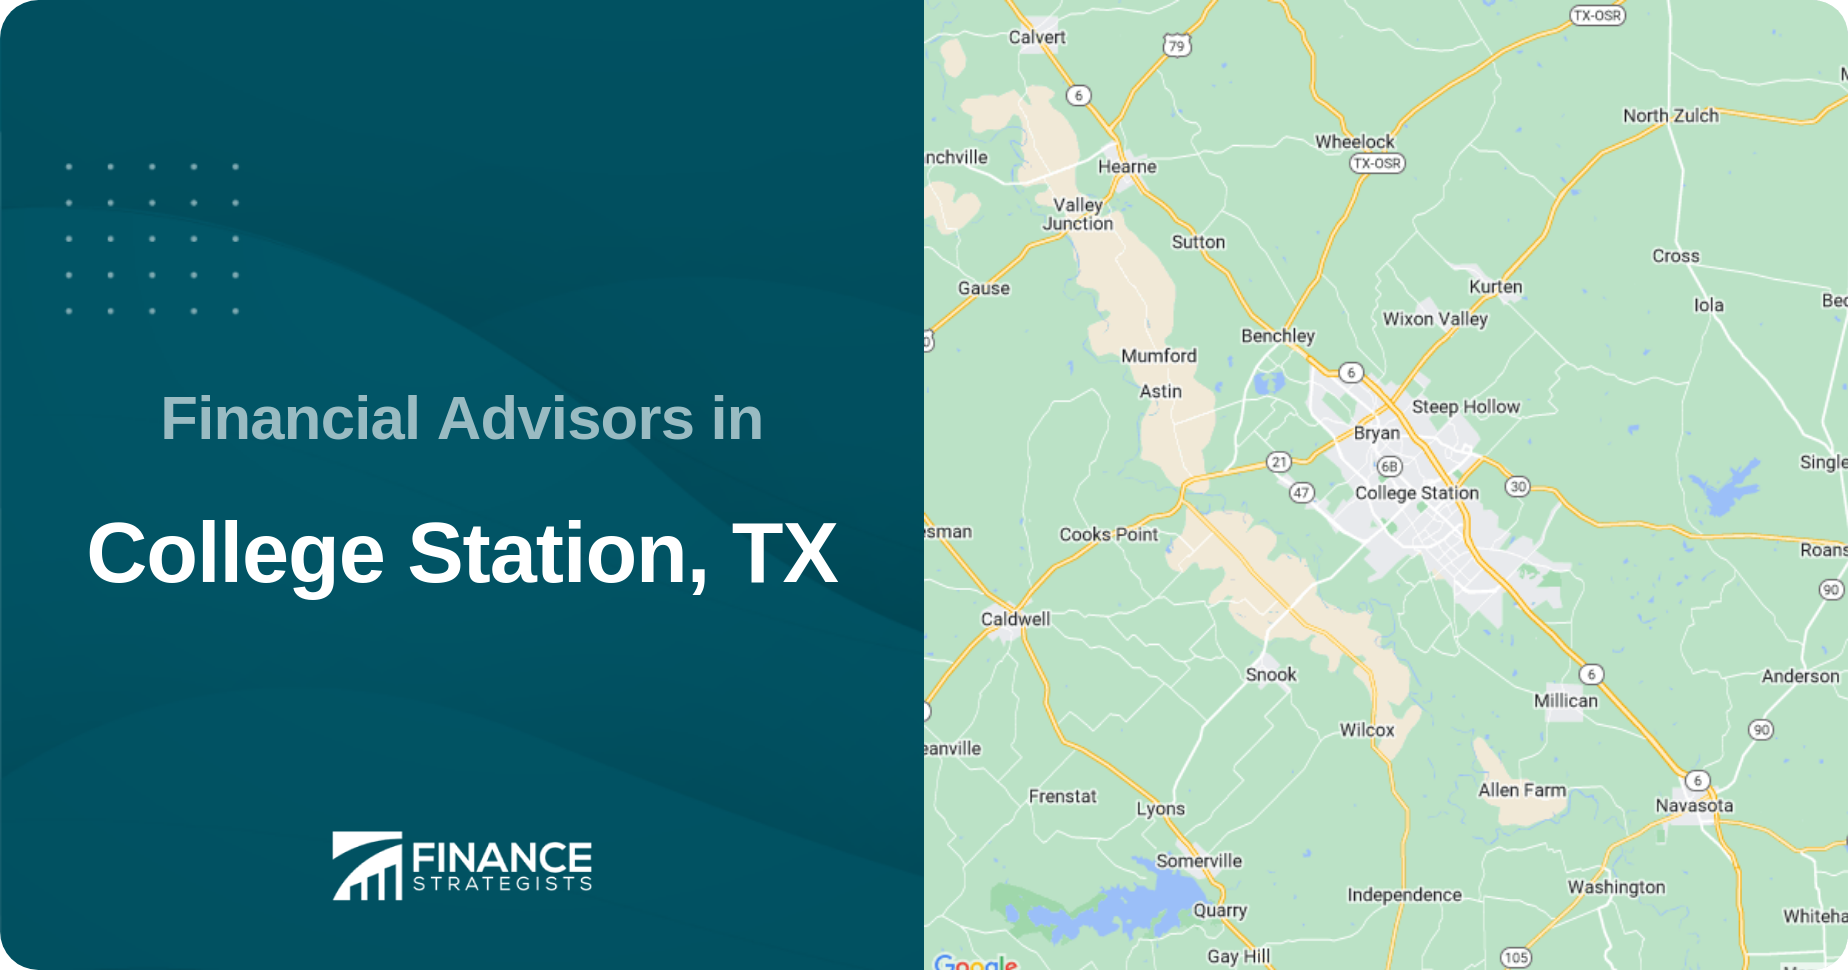 Financial Advisors in College Station, TX